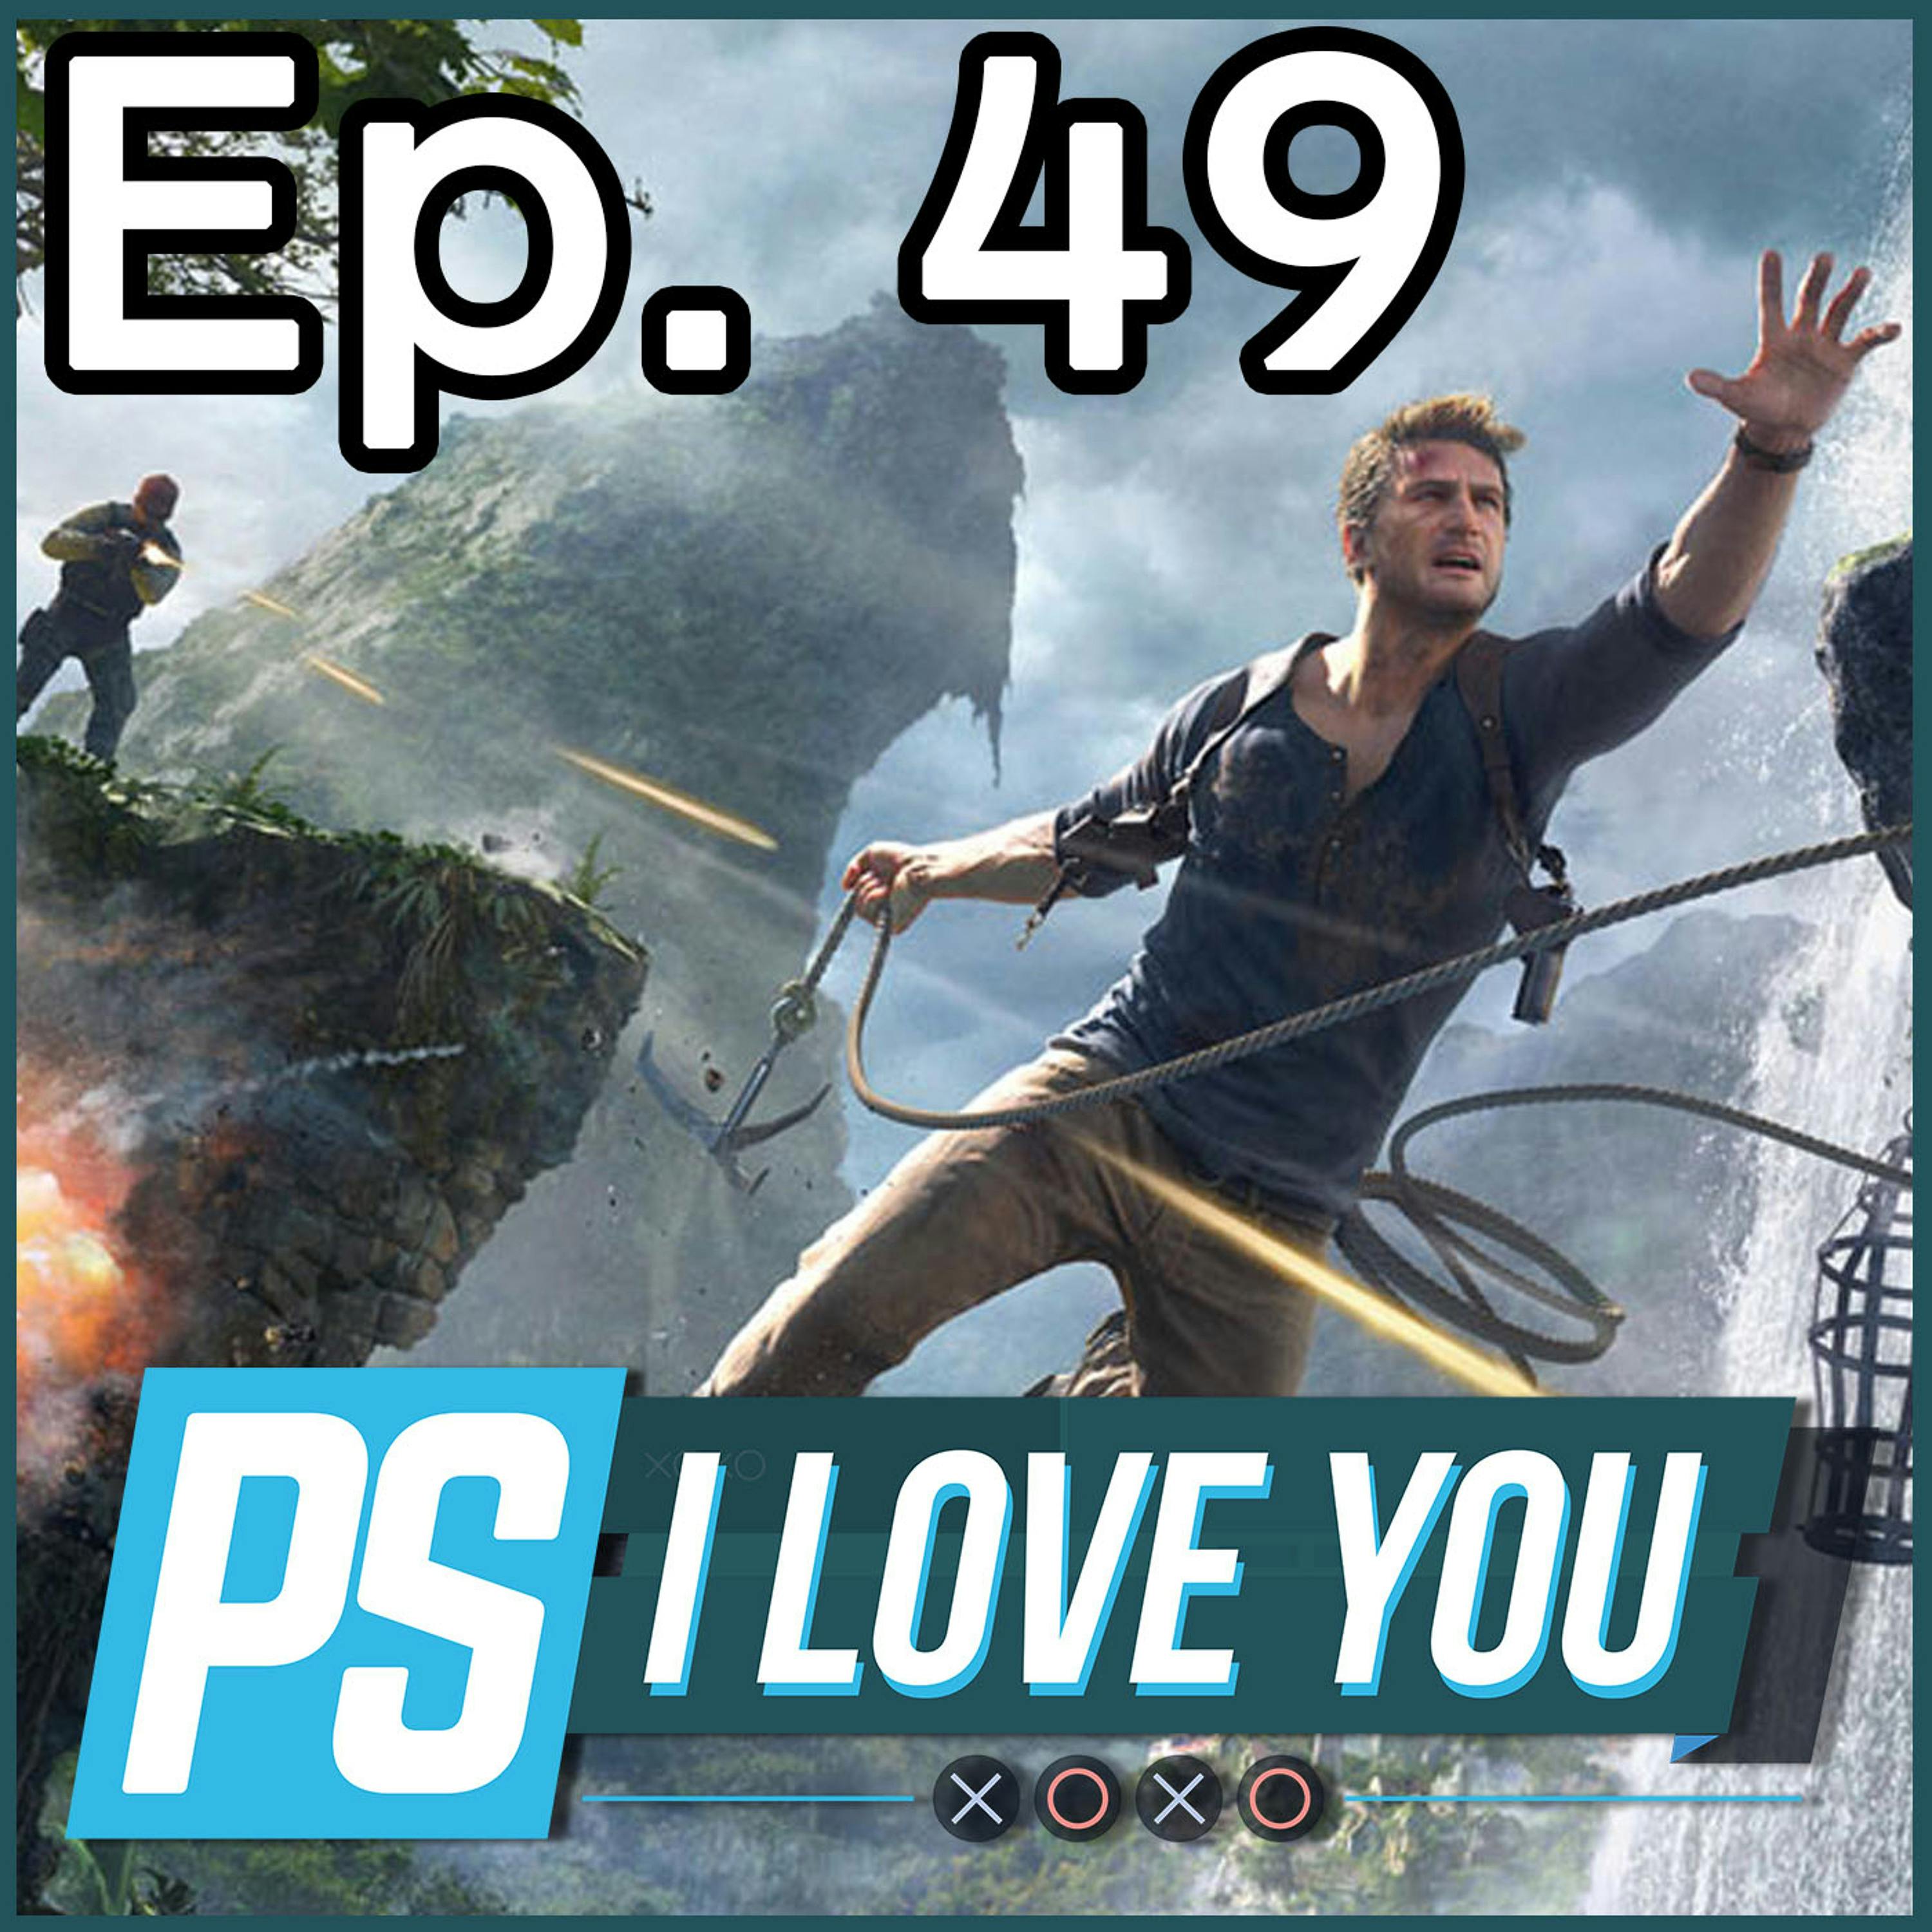 Top 10 PS4 Games (2016 Edition) - PS I Love You XOXO Ep. 49